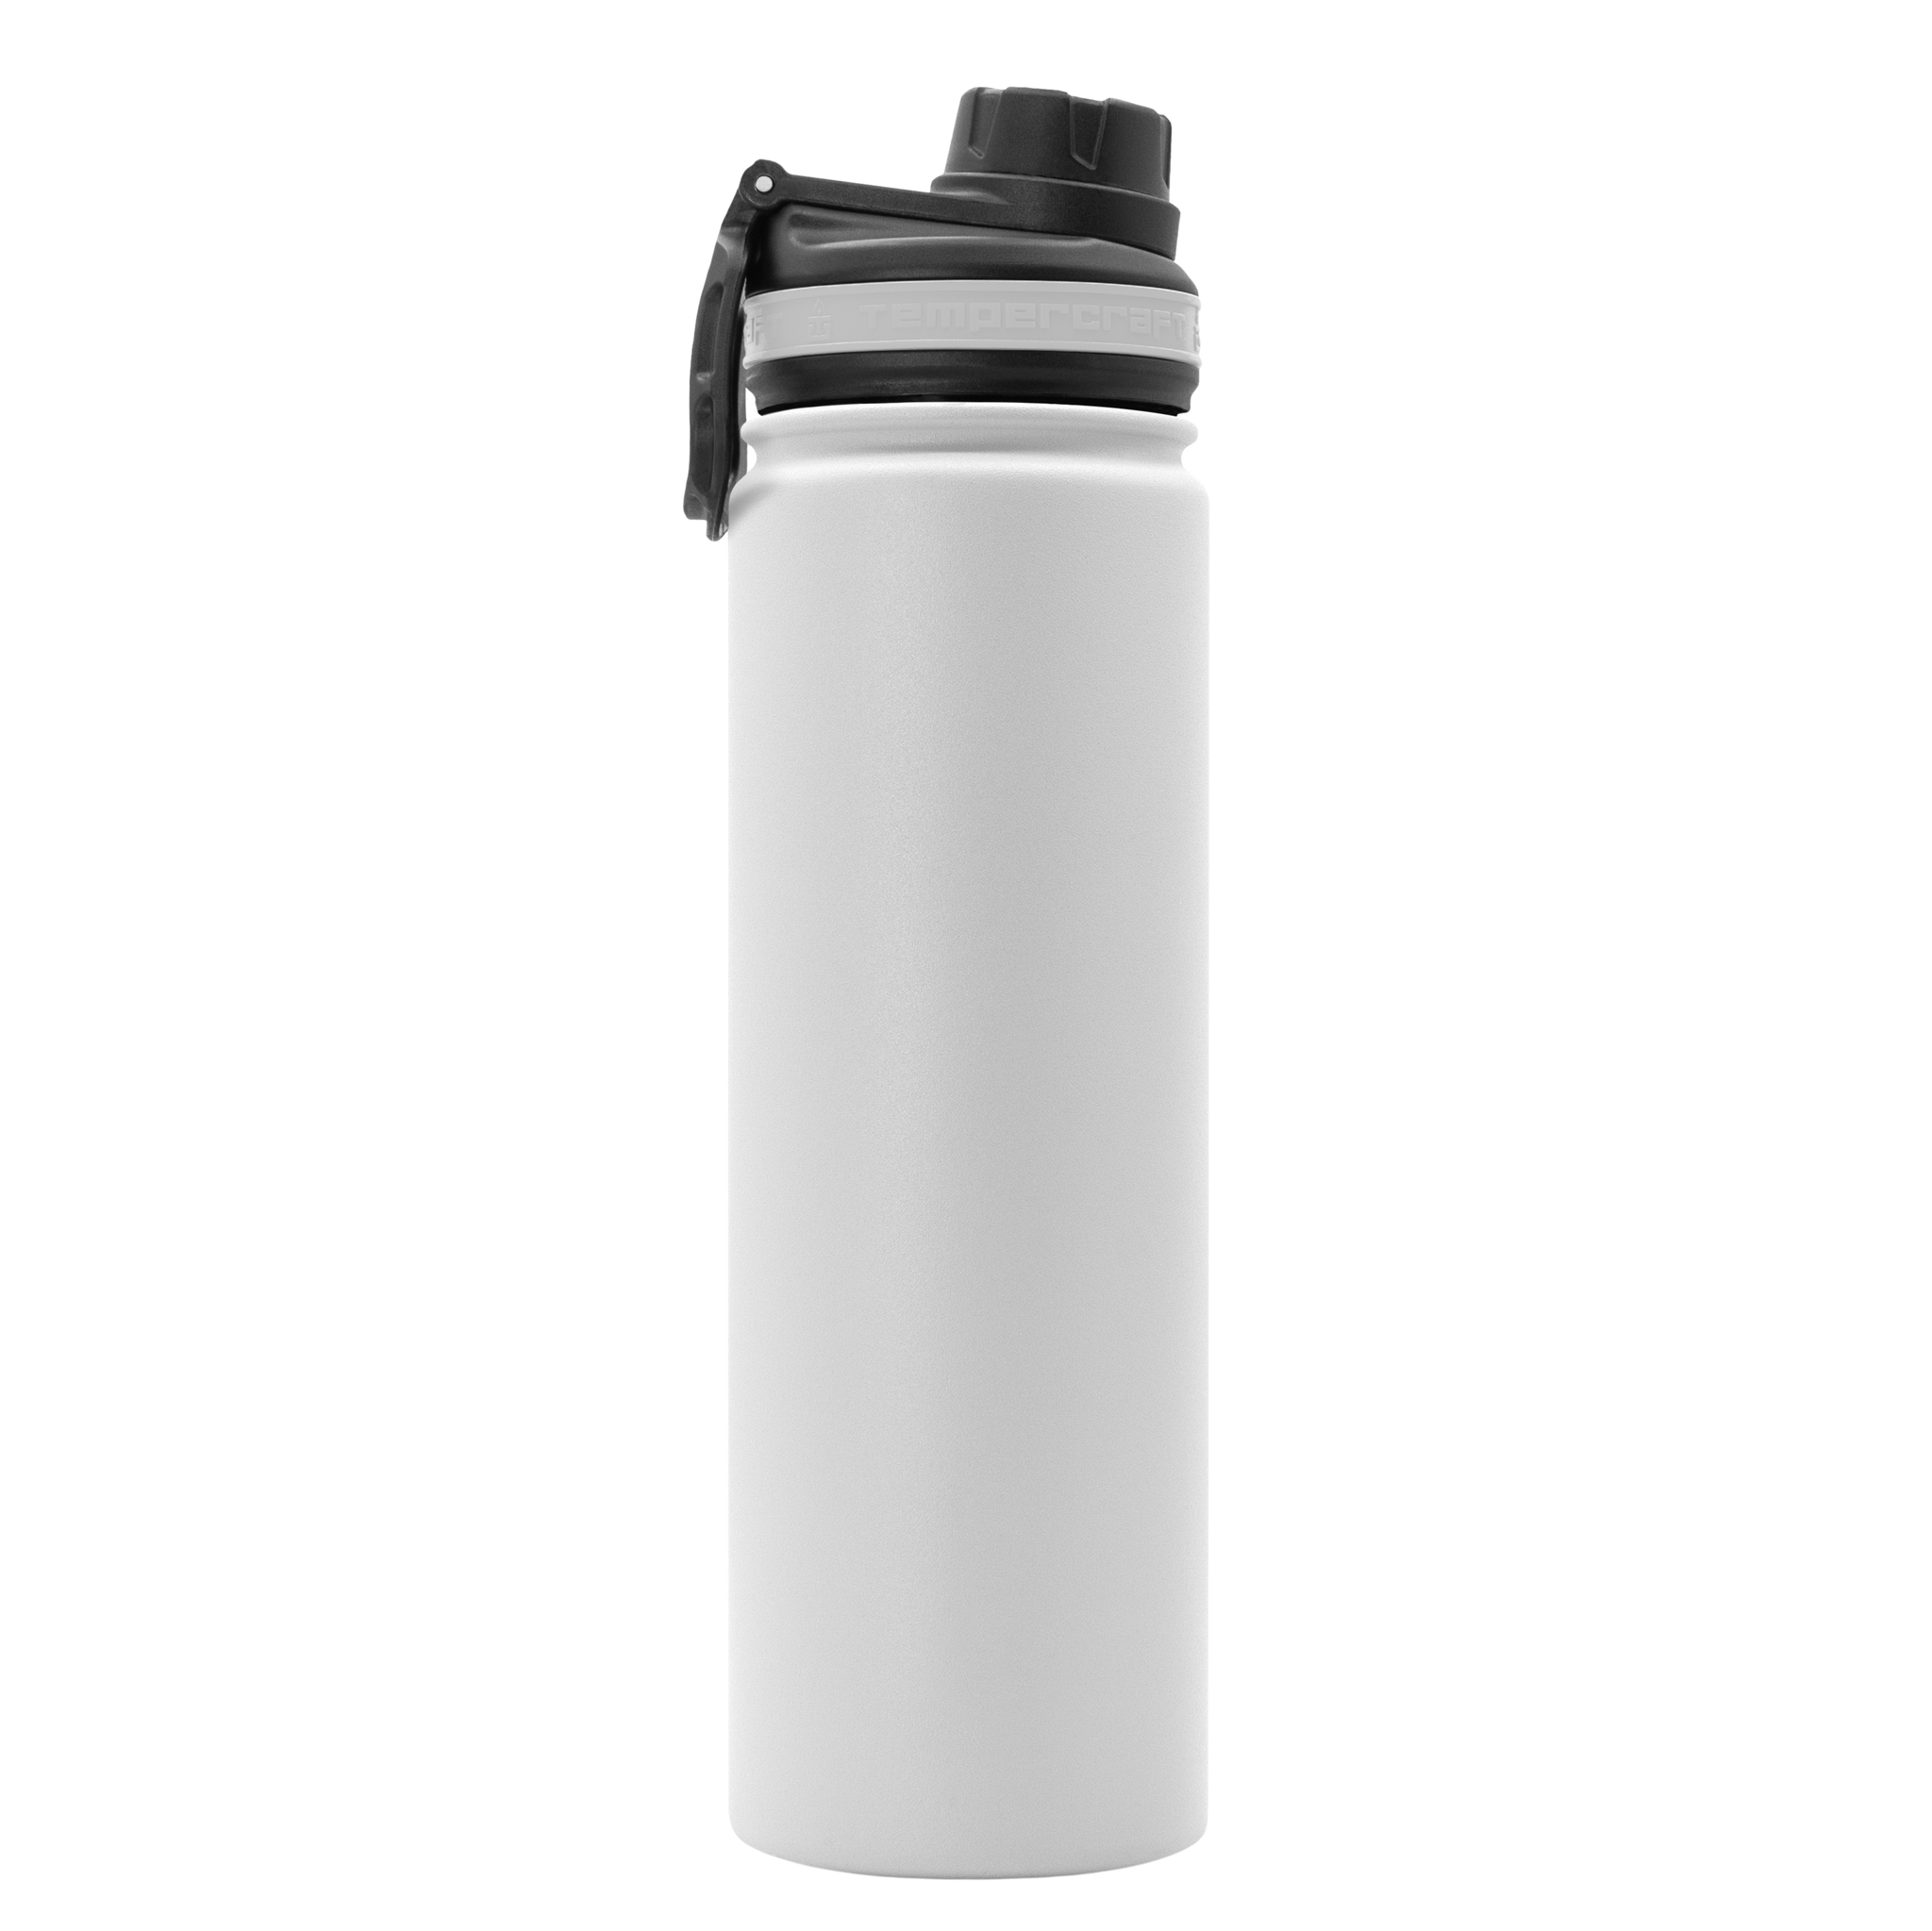 NEW Cirkul 22oz White Stainless Steel Water Thermos Bottle ONLY